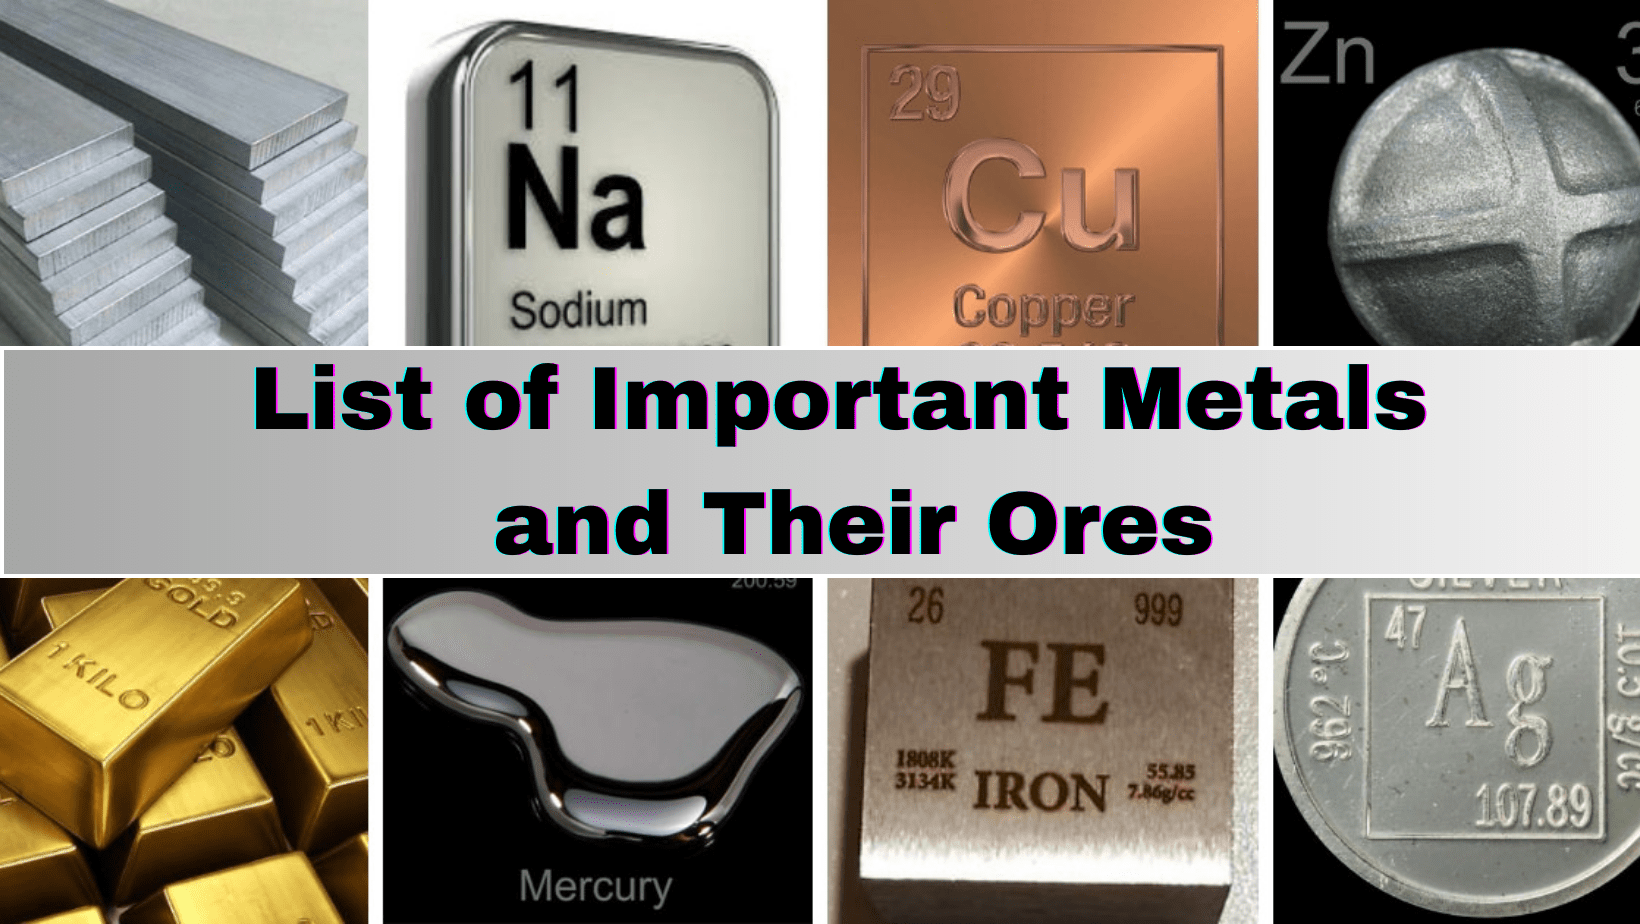 List of Important Metals and Their Ores – Complete list